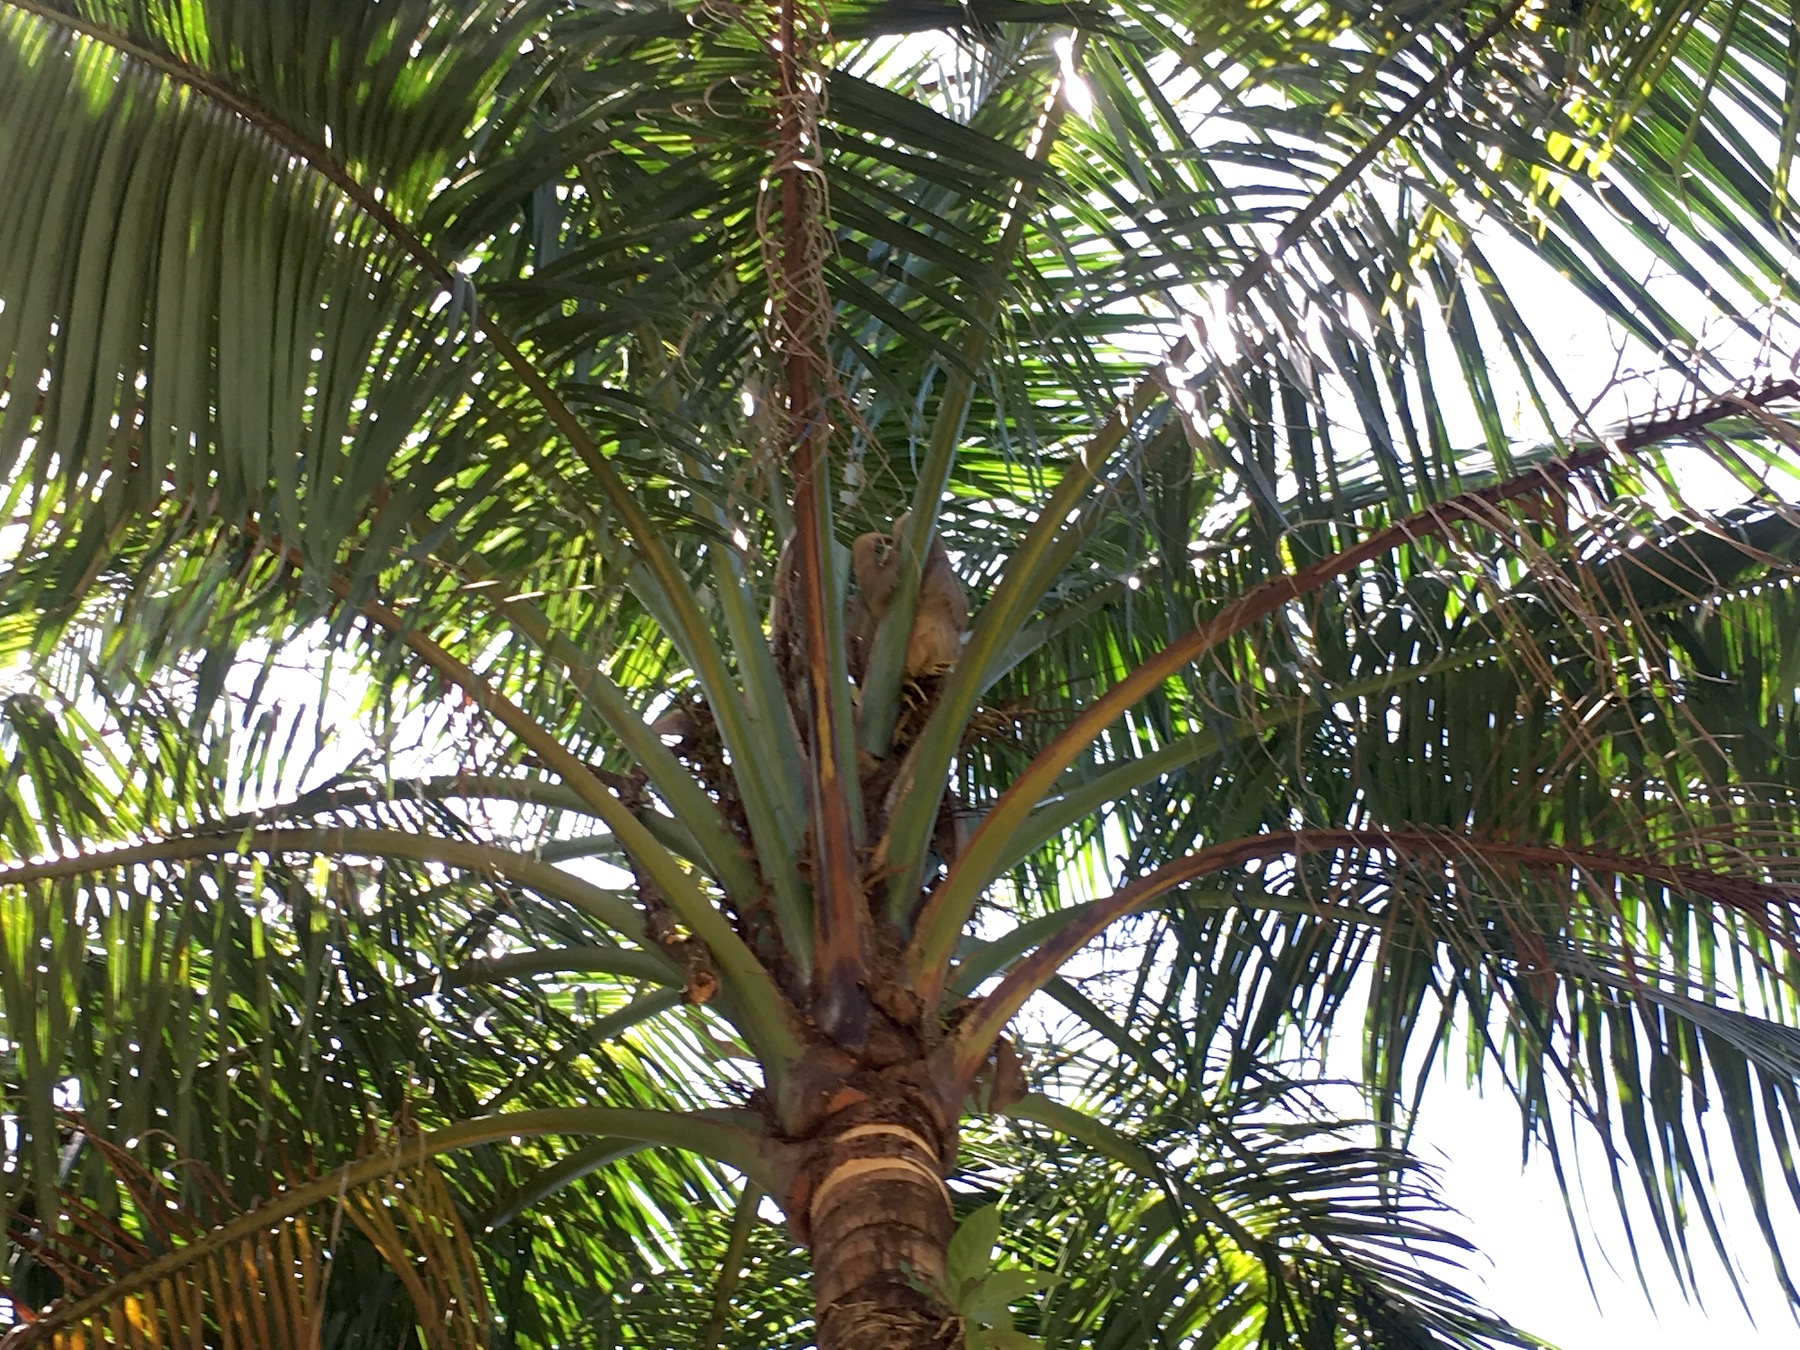 Protected by the shade of the palm trees at Finca Canas Castilla